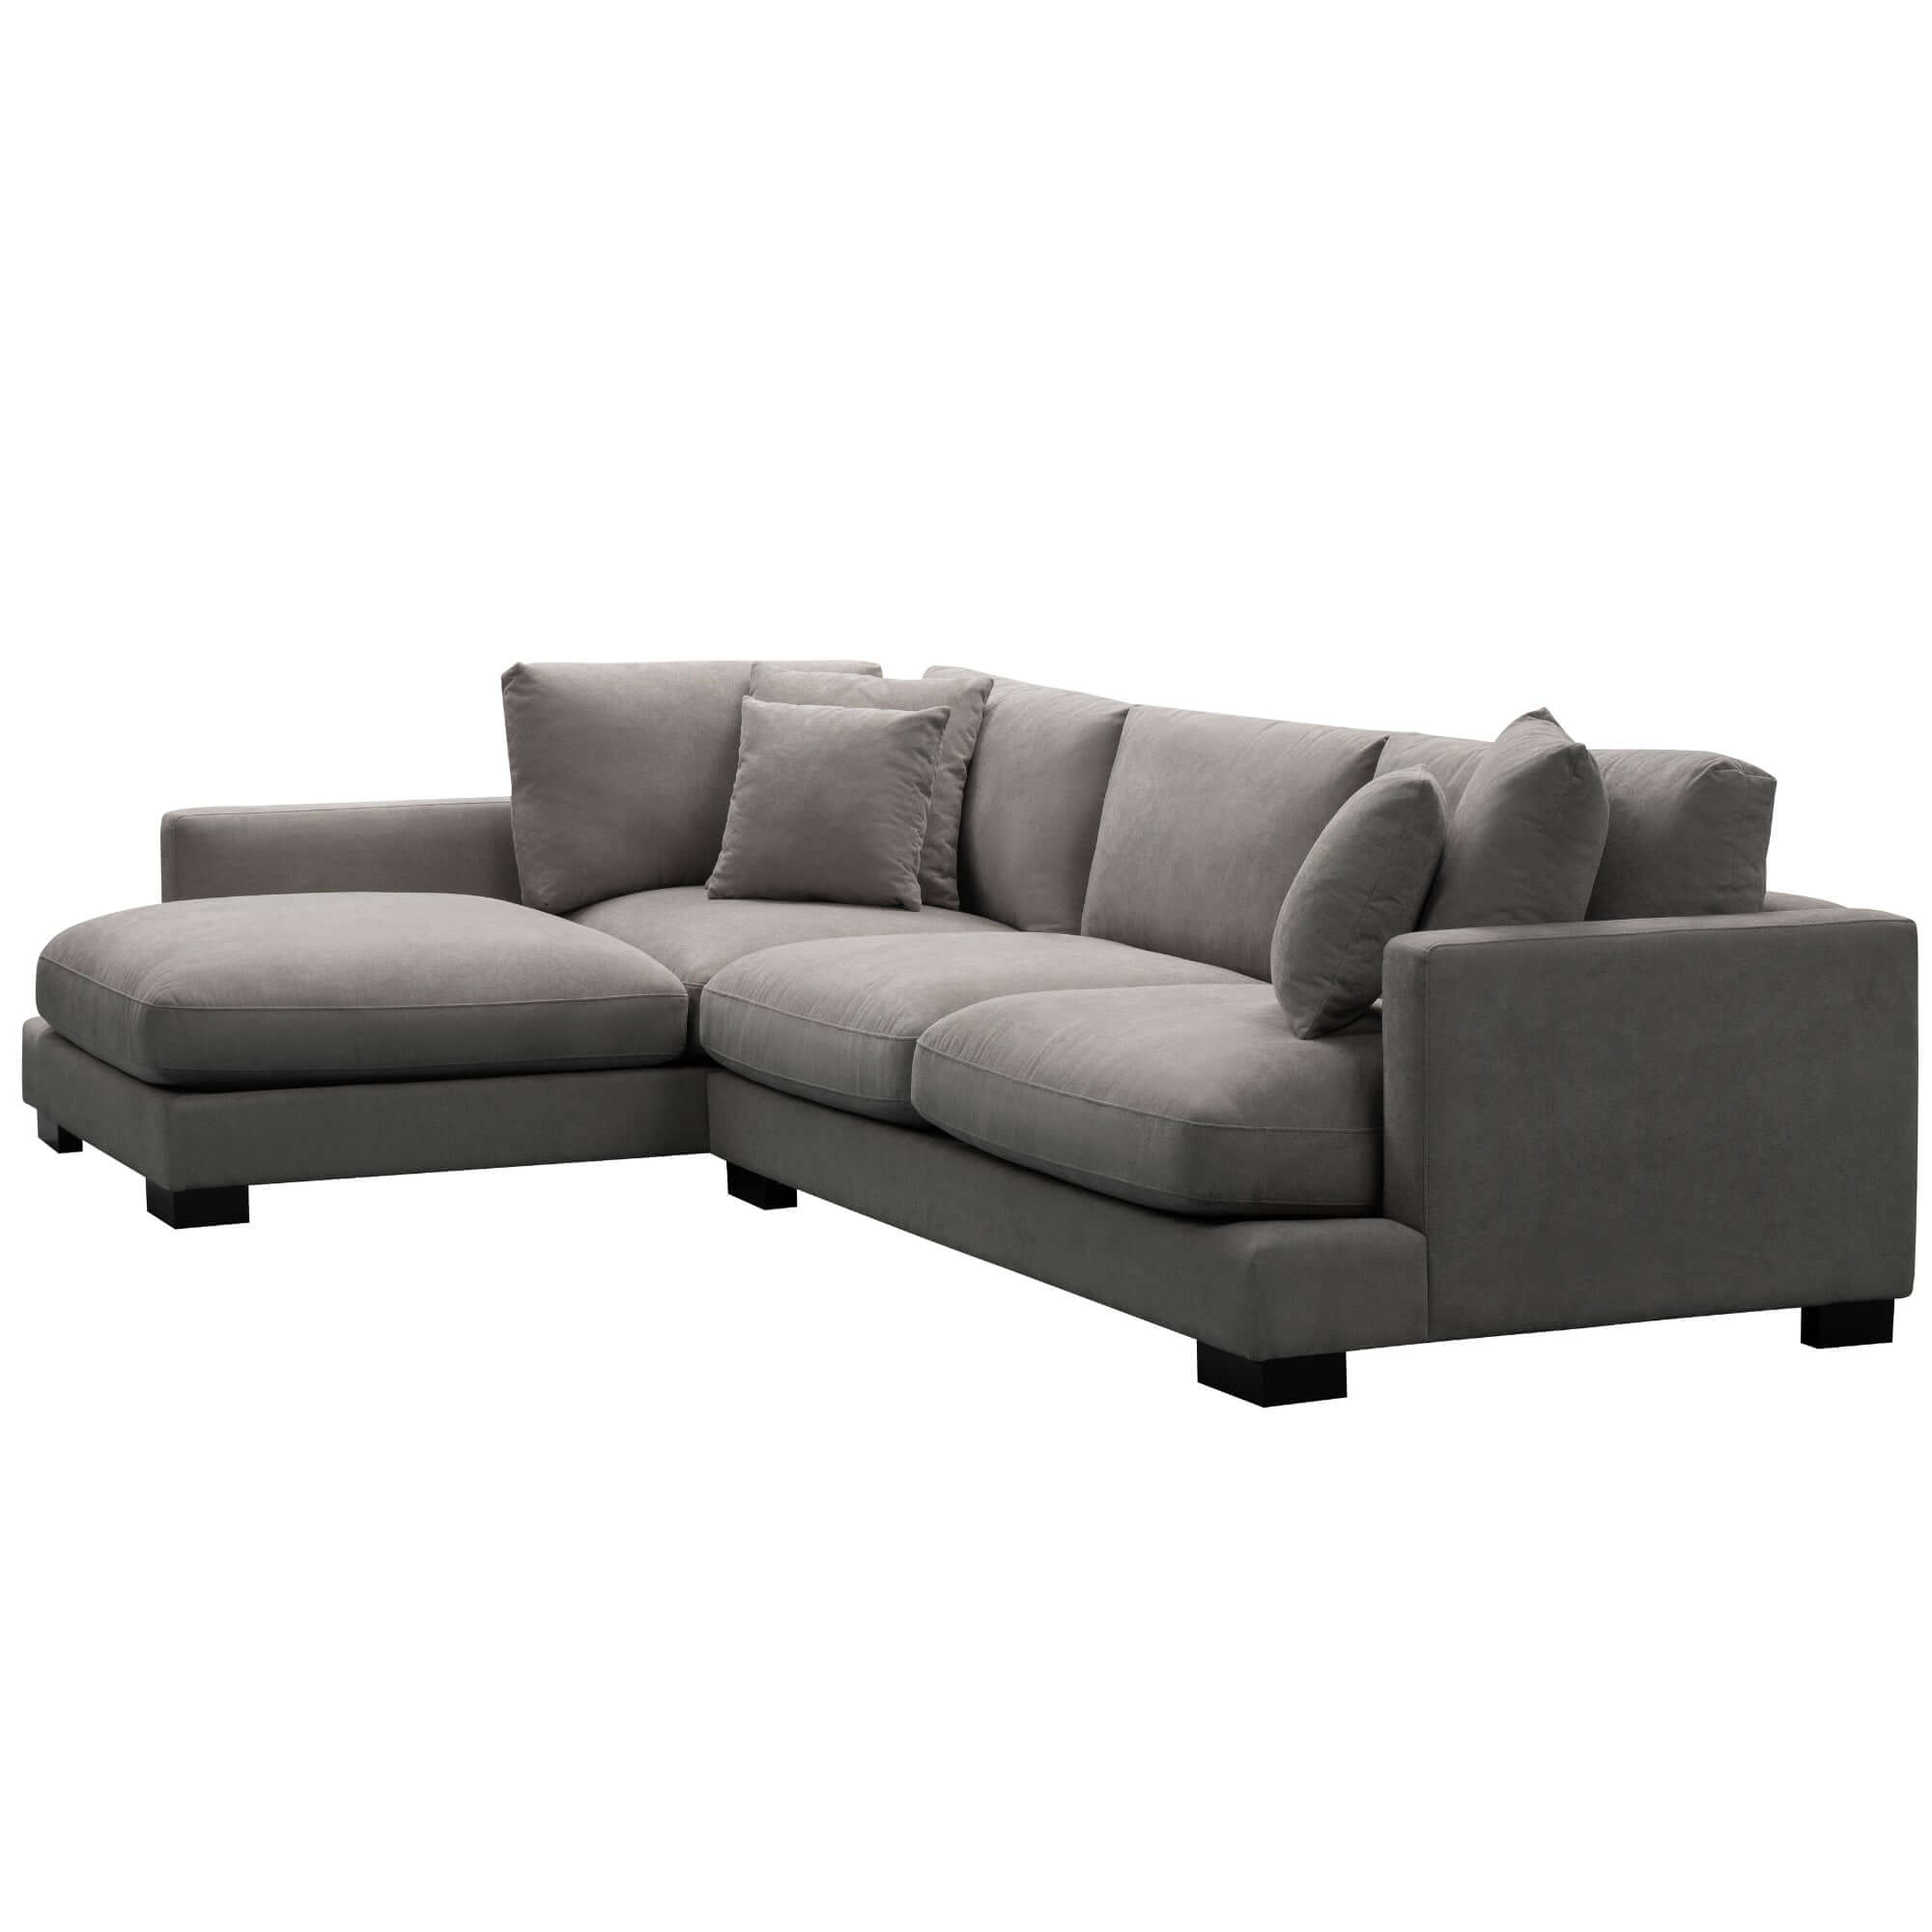 Royalty 3-Seater Left Chaise Lounge - Grey Fabric-Upinteriors